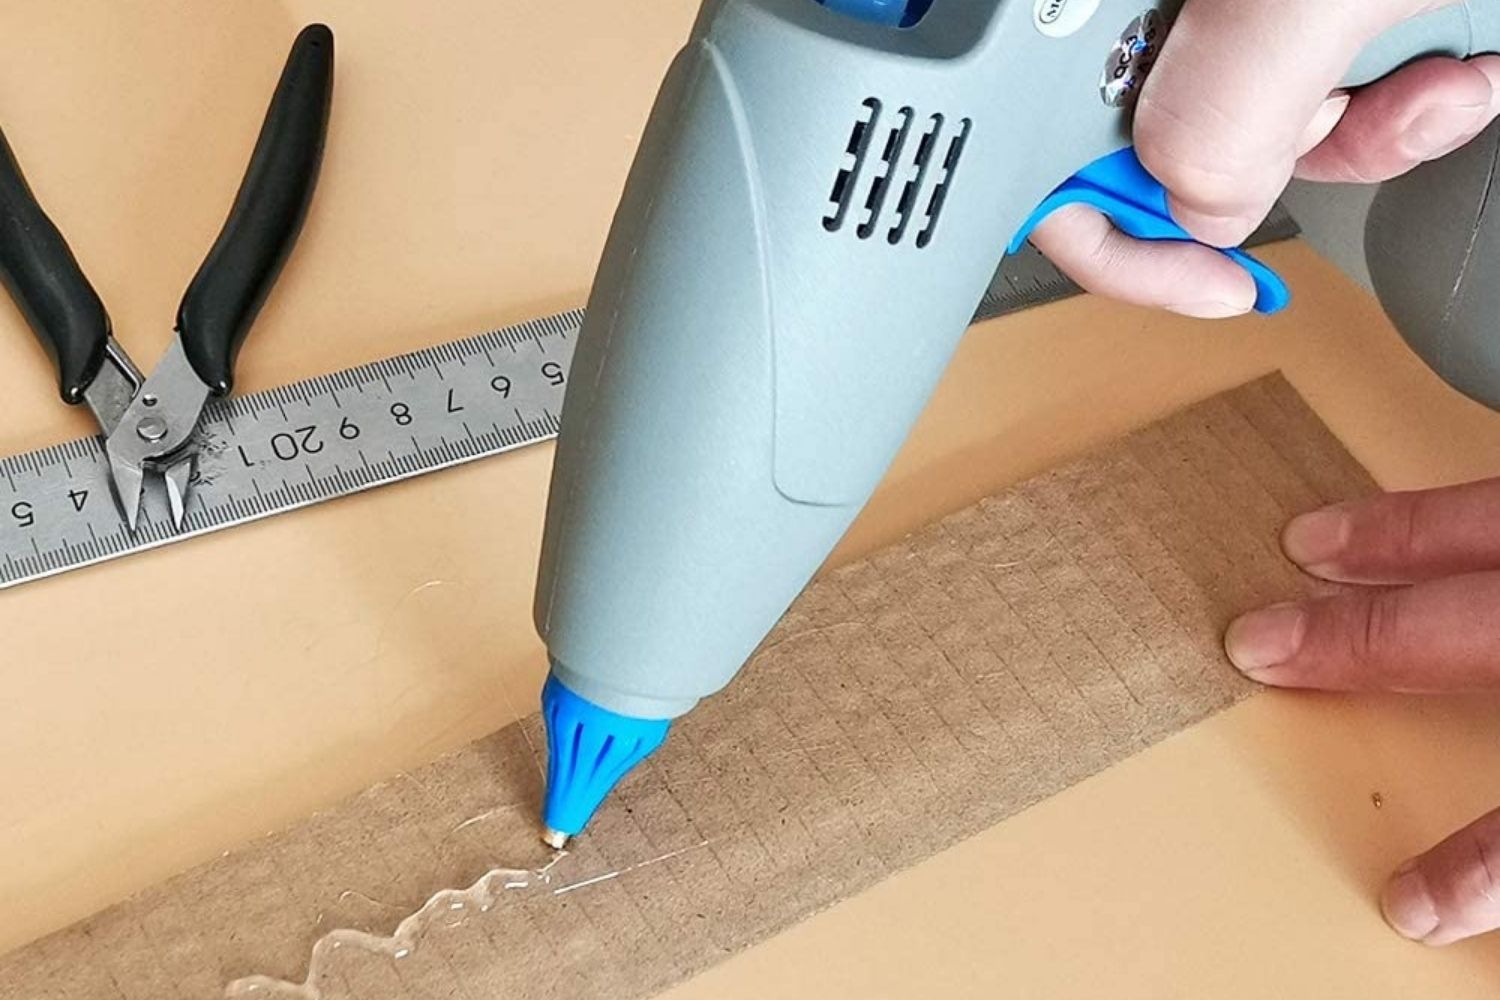 A crafter using the best cordless glue gun option to apply a squiggly line of hot glue on a strip of cardboard